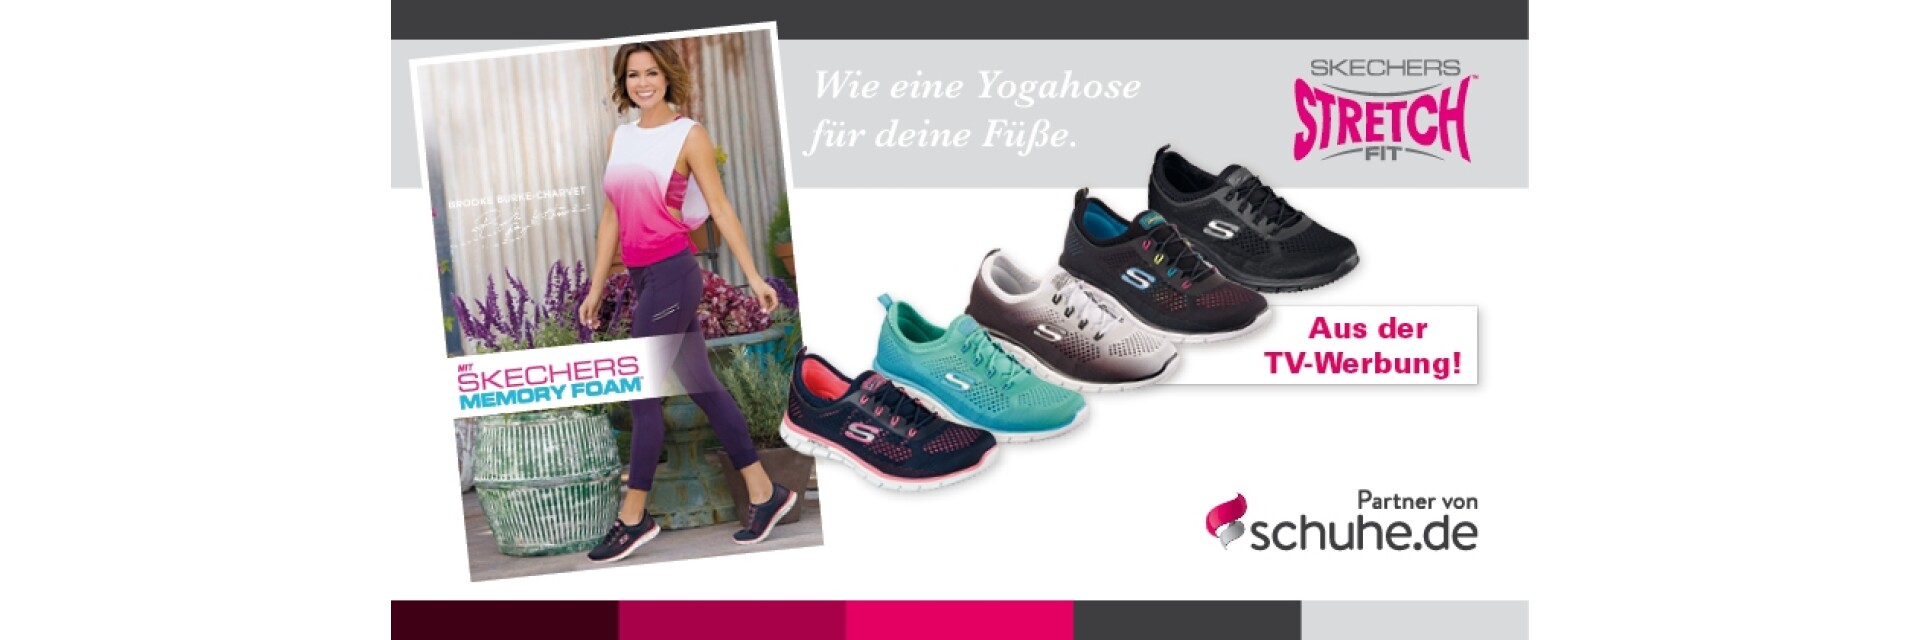 Skechers - Stretch Fit (Banner, 16:9)